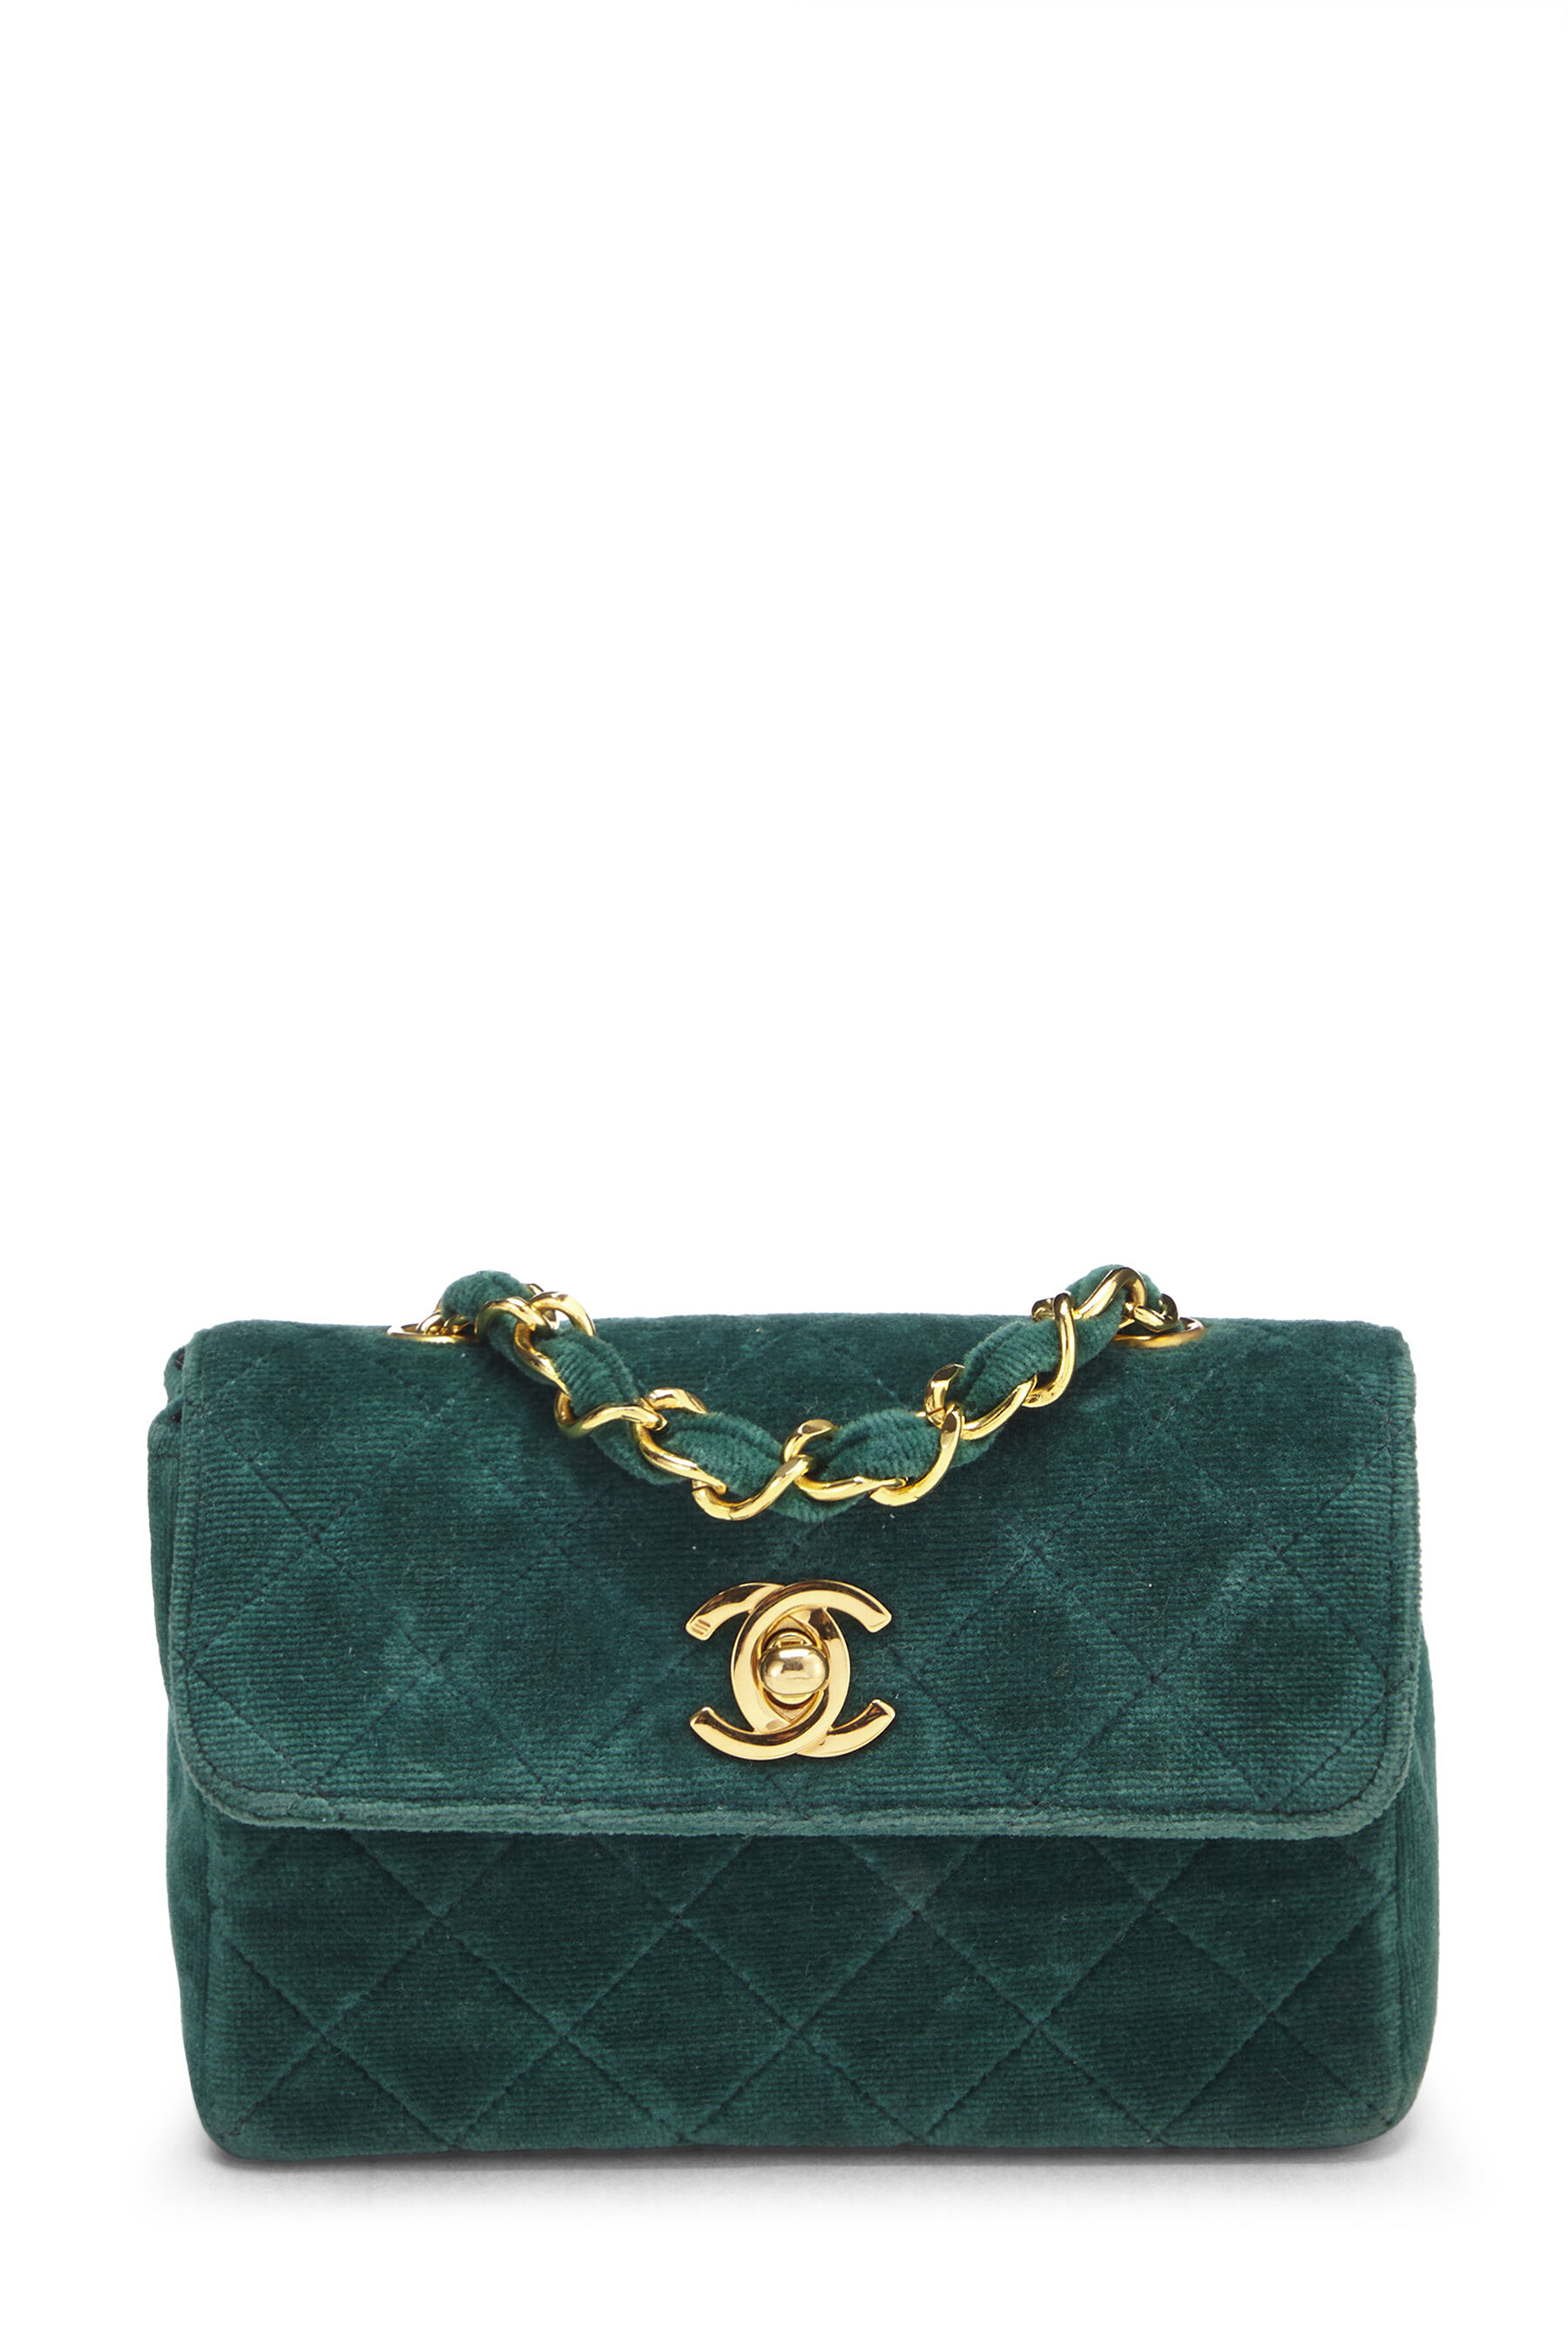 Chanel Green Quilted Velvet Half Flap Micro